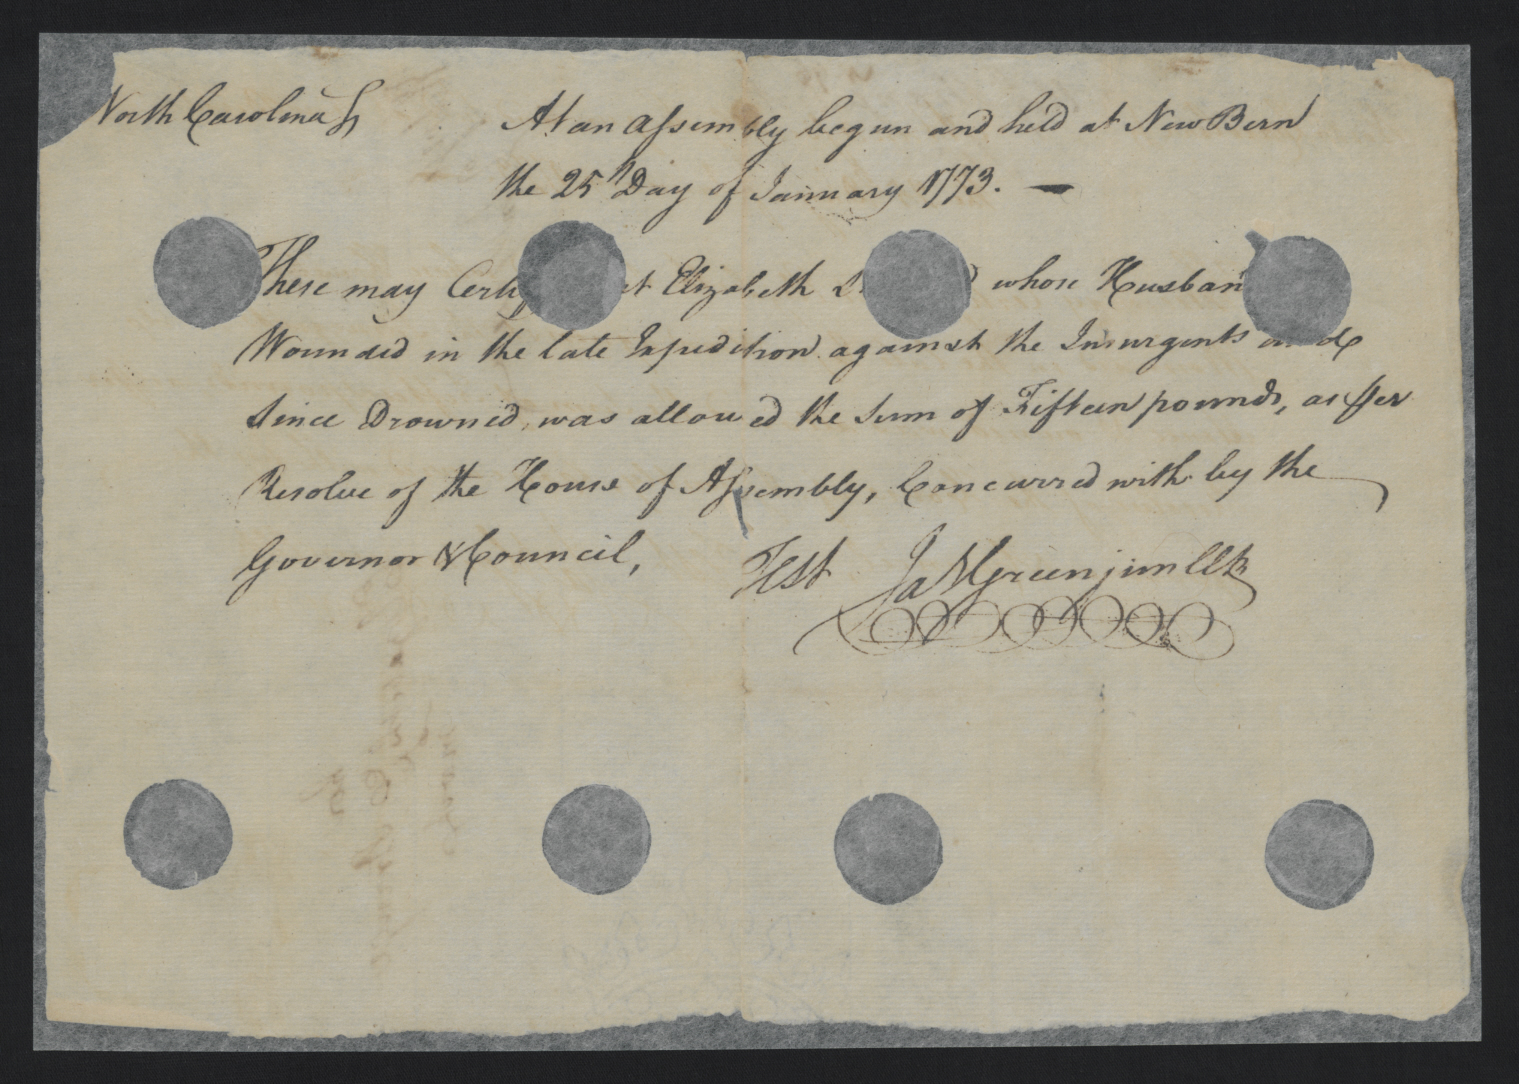 Pension Certificate from the North Carolina Colonial Assembly to Elizabeth Strange, 25 January 1773, page 1.